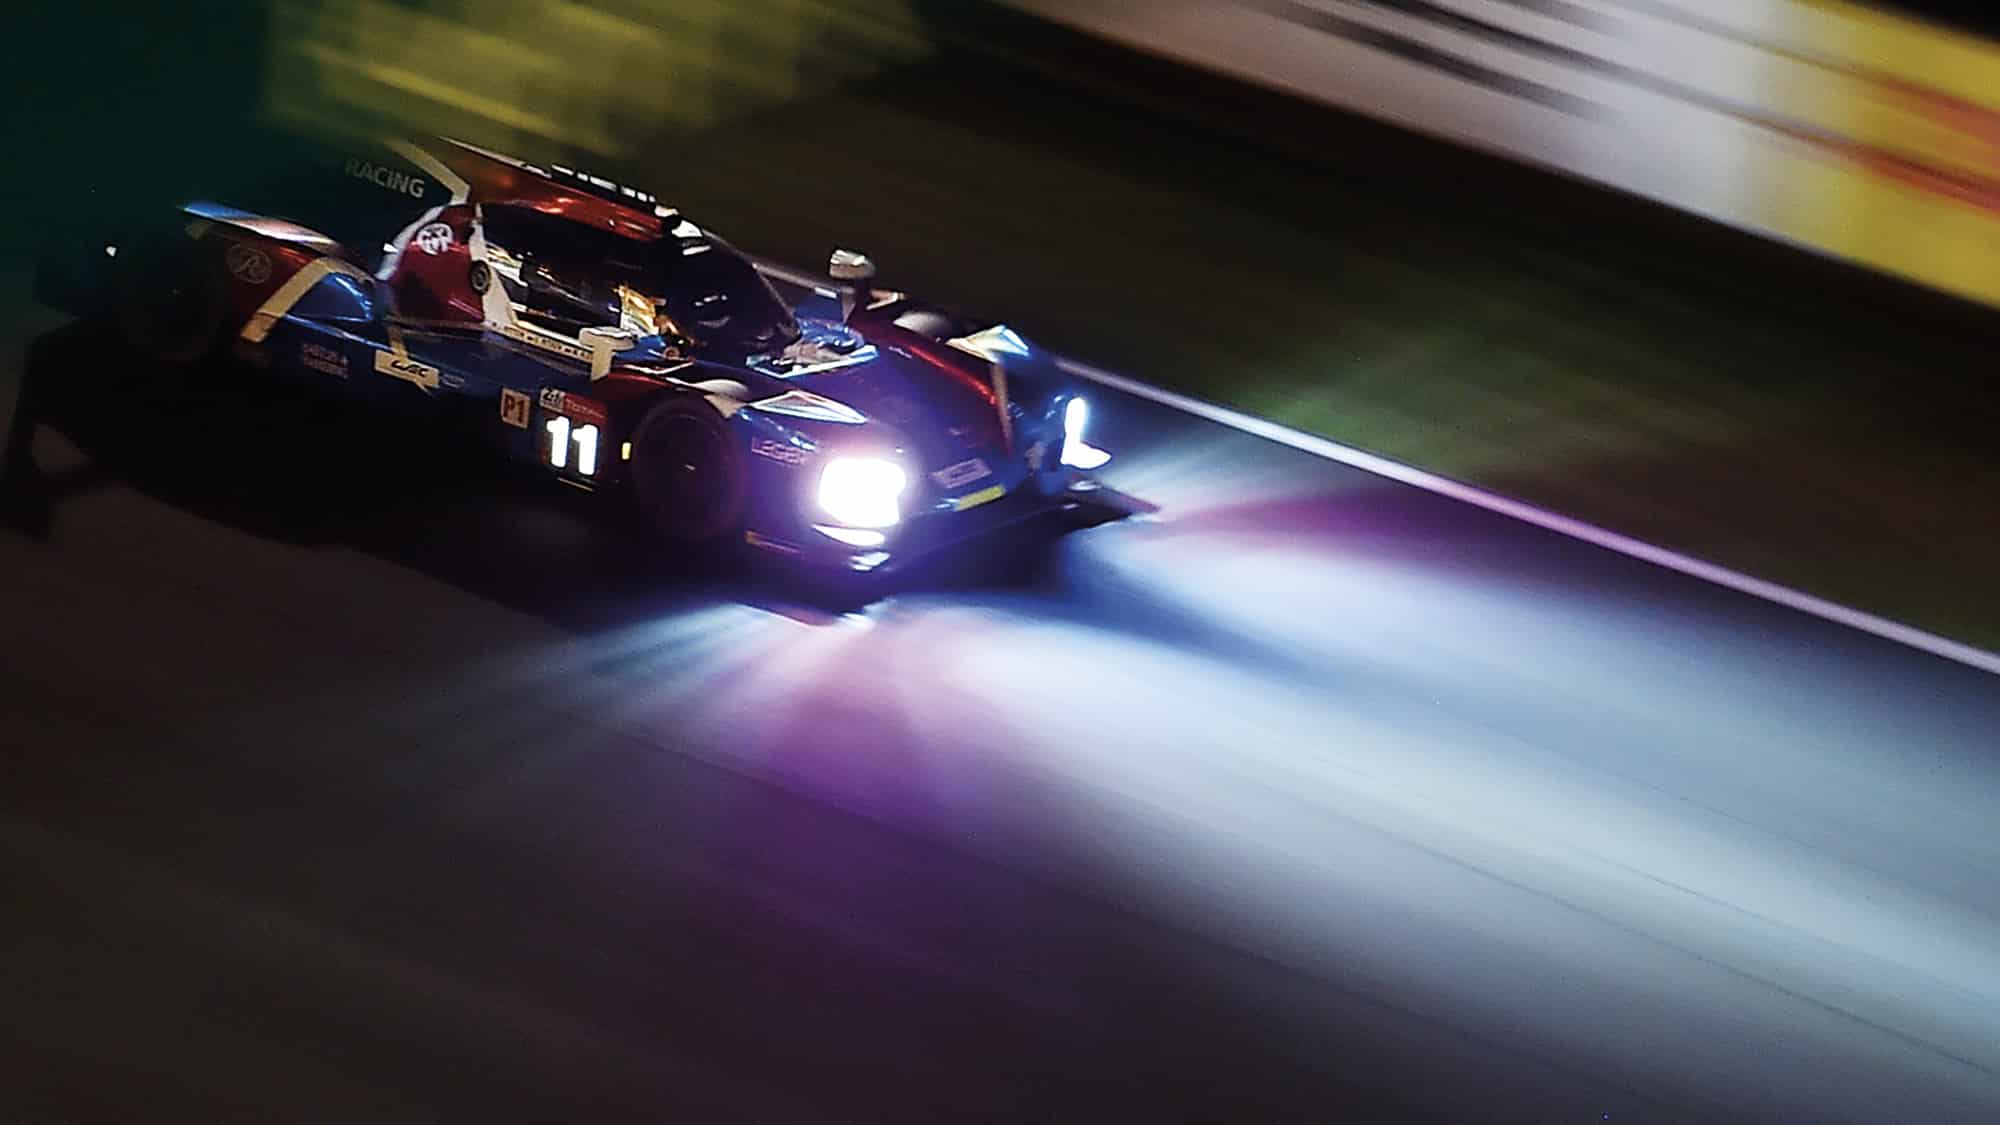 SMP Racing's headlights illuminate the track at night during the Le Mans 24 Hours